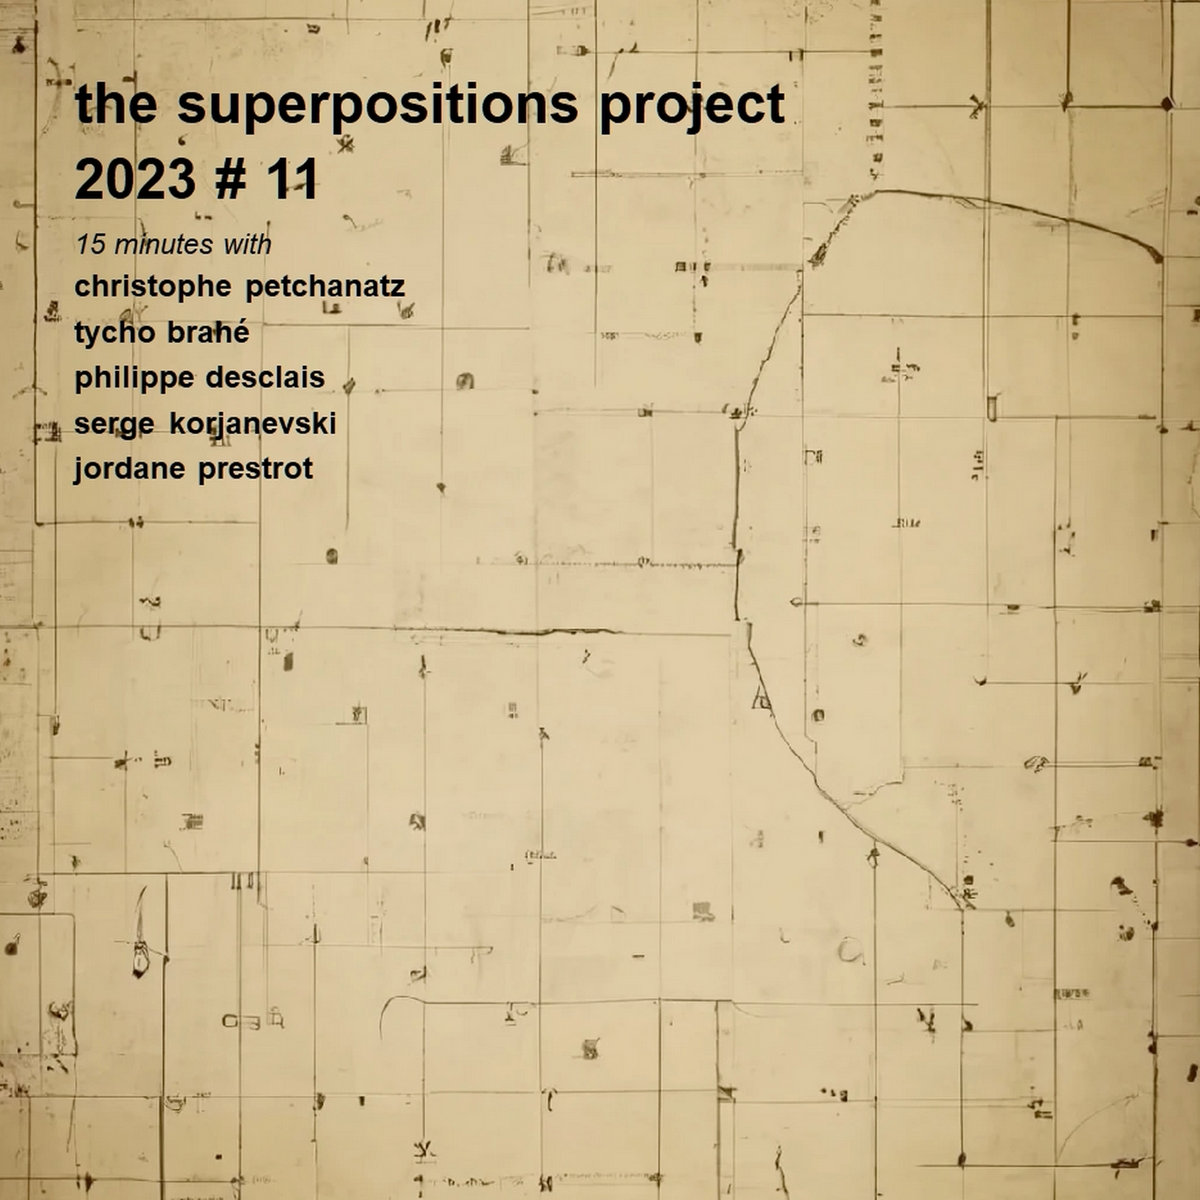 The Superpositions Project 2023 # 11